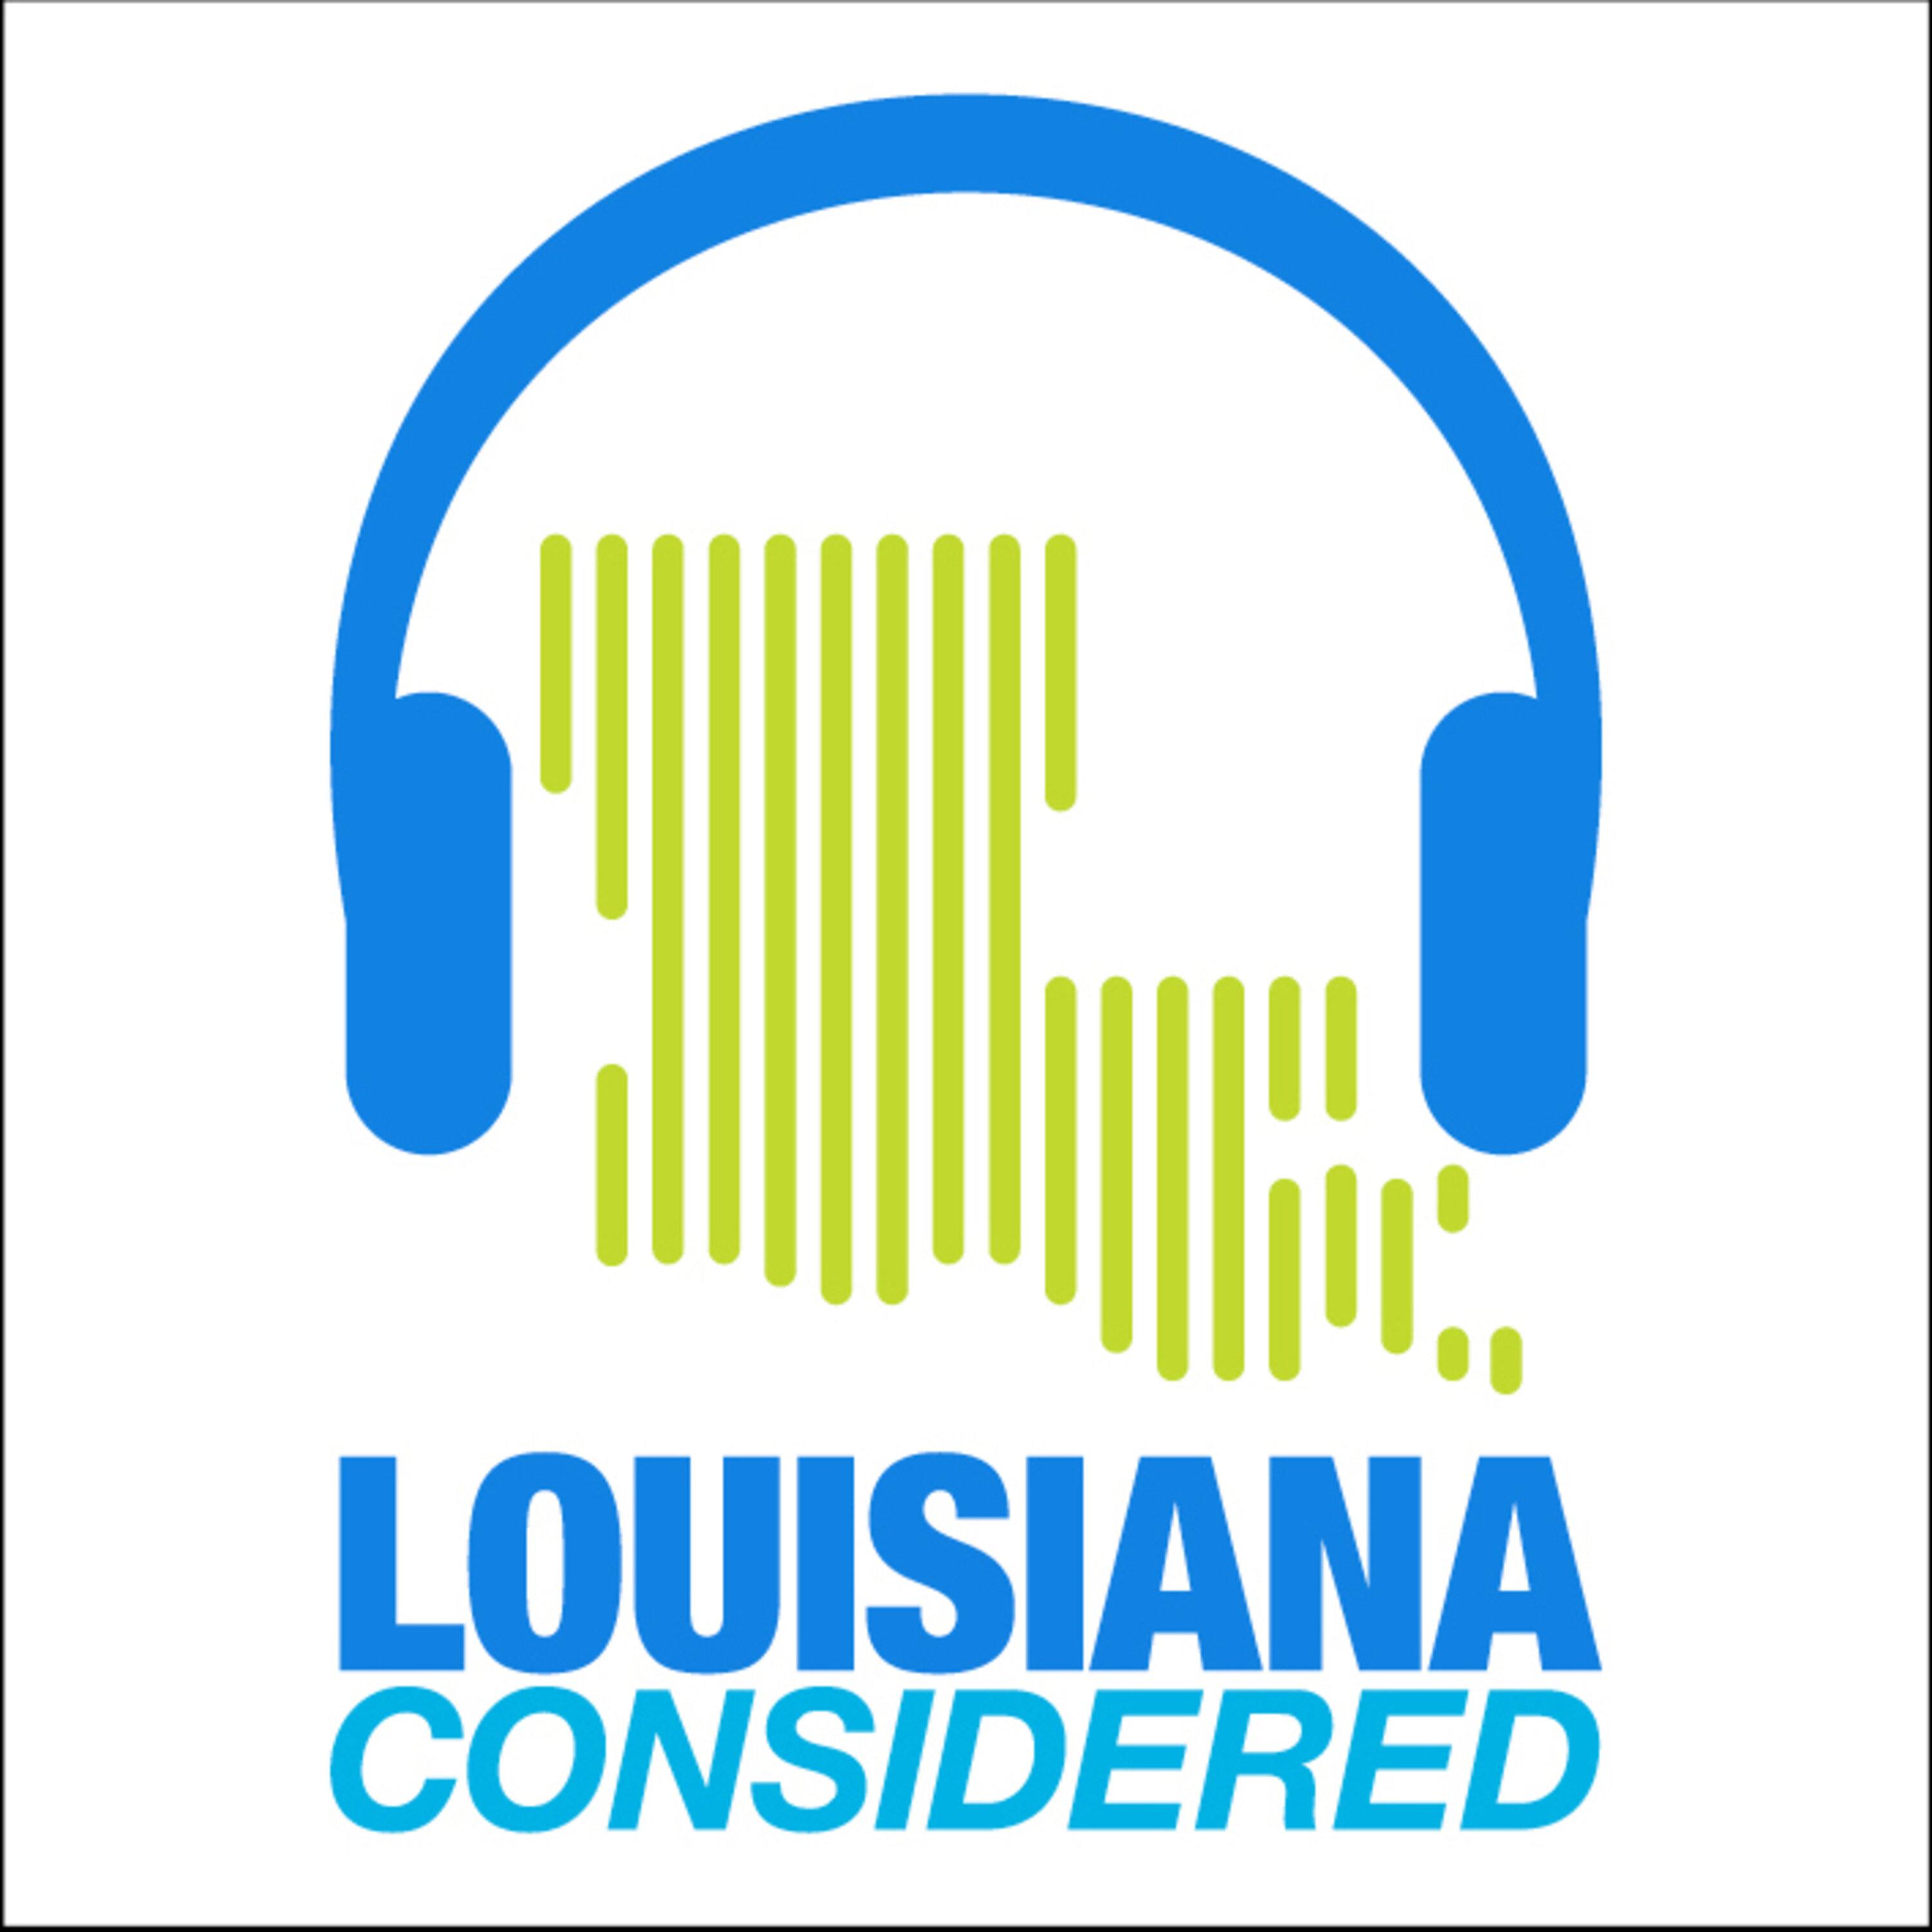 Thumbnail for "Louisiana Considered: Baton Rouge’s Preparations For End Of Federal Eviction Moratorium, Saltwater Intrusion In Baton Rouge’s Aquifer System".